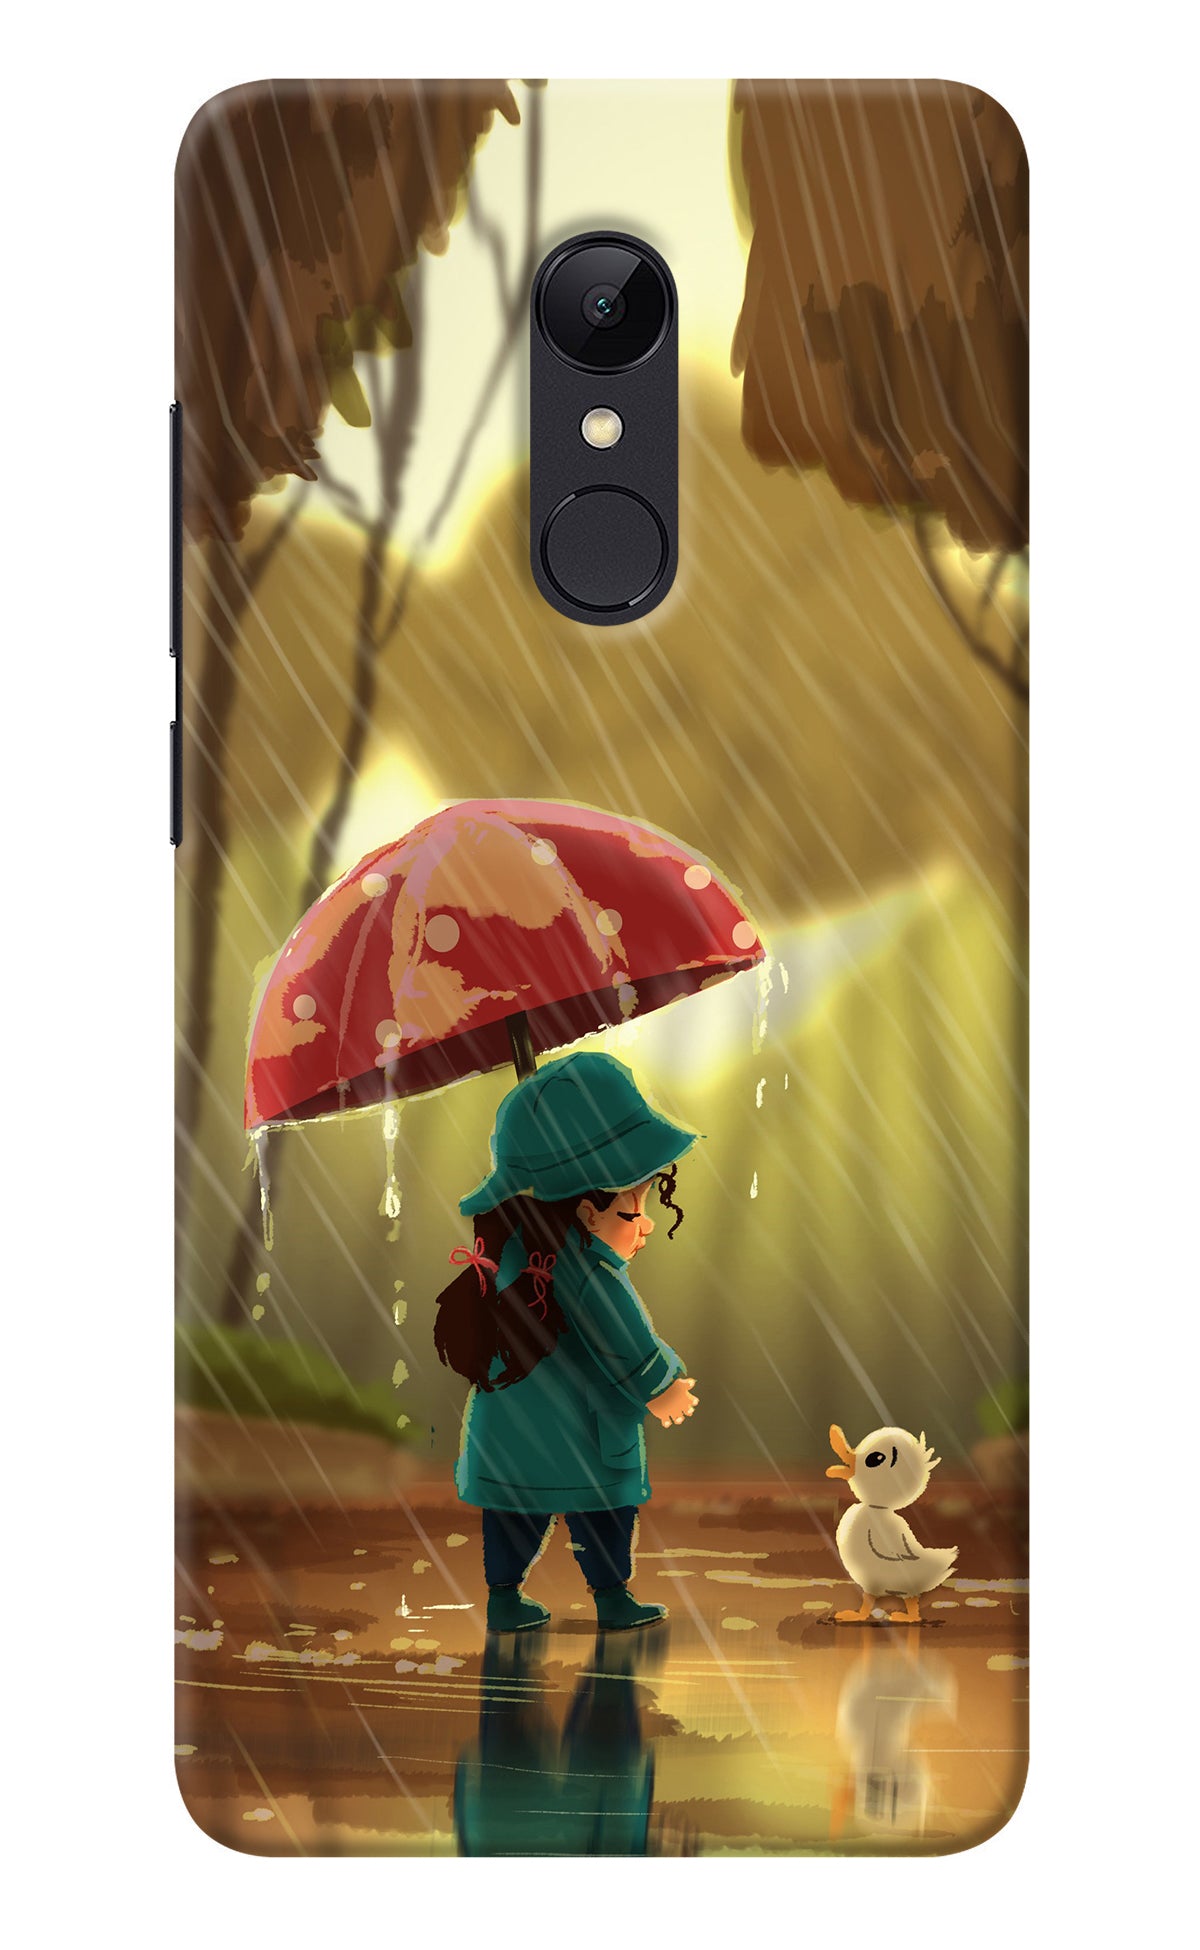 Rainy Day Redmi Note 4 Back Cover